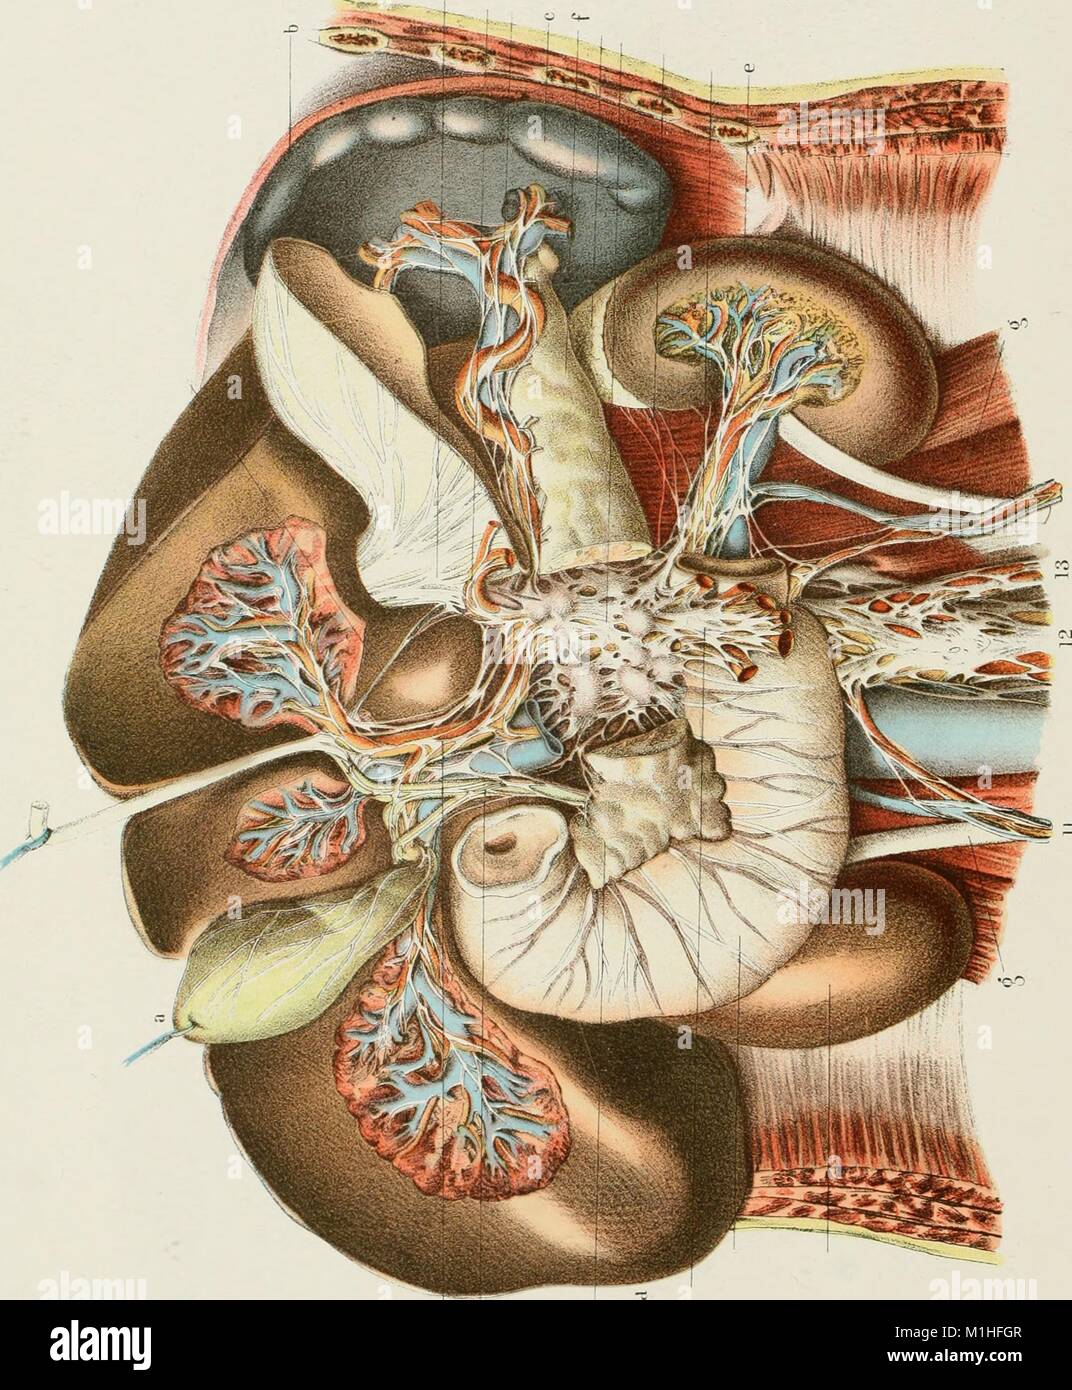 Color illustration of the human gallbladder and bile ducts, depicted in relation to associated internal organs, from the volume 'Annual and Analytical Cyclopaedia of Practical Medicine, ' authored by Charles E. de M. Sajous (Charles Eucharist de Medicis), 1898. Courtesy Internet Archive. () Stock Photo